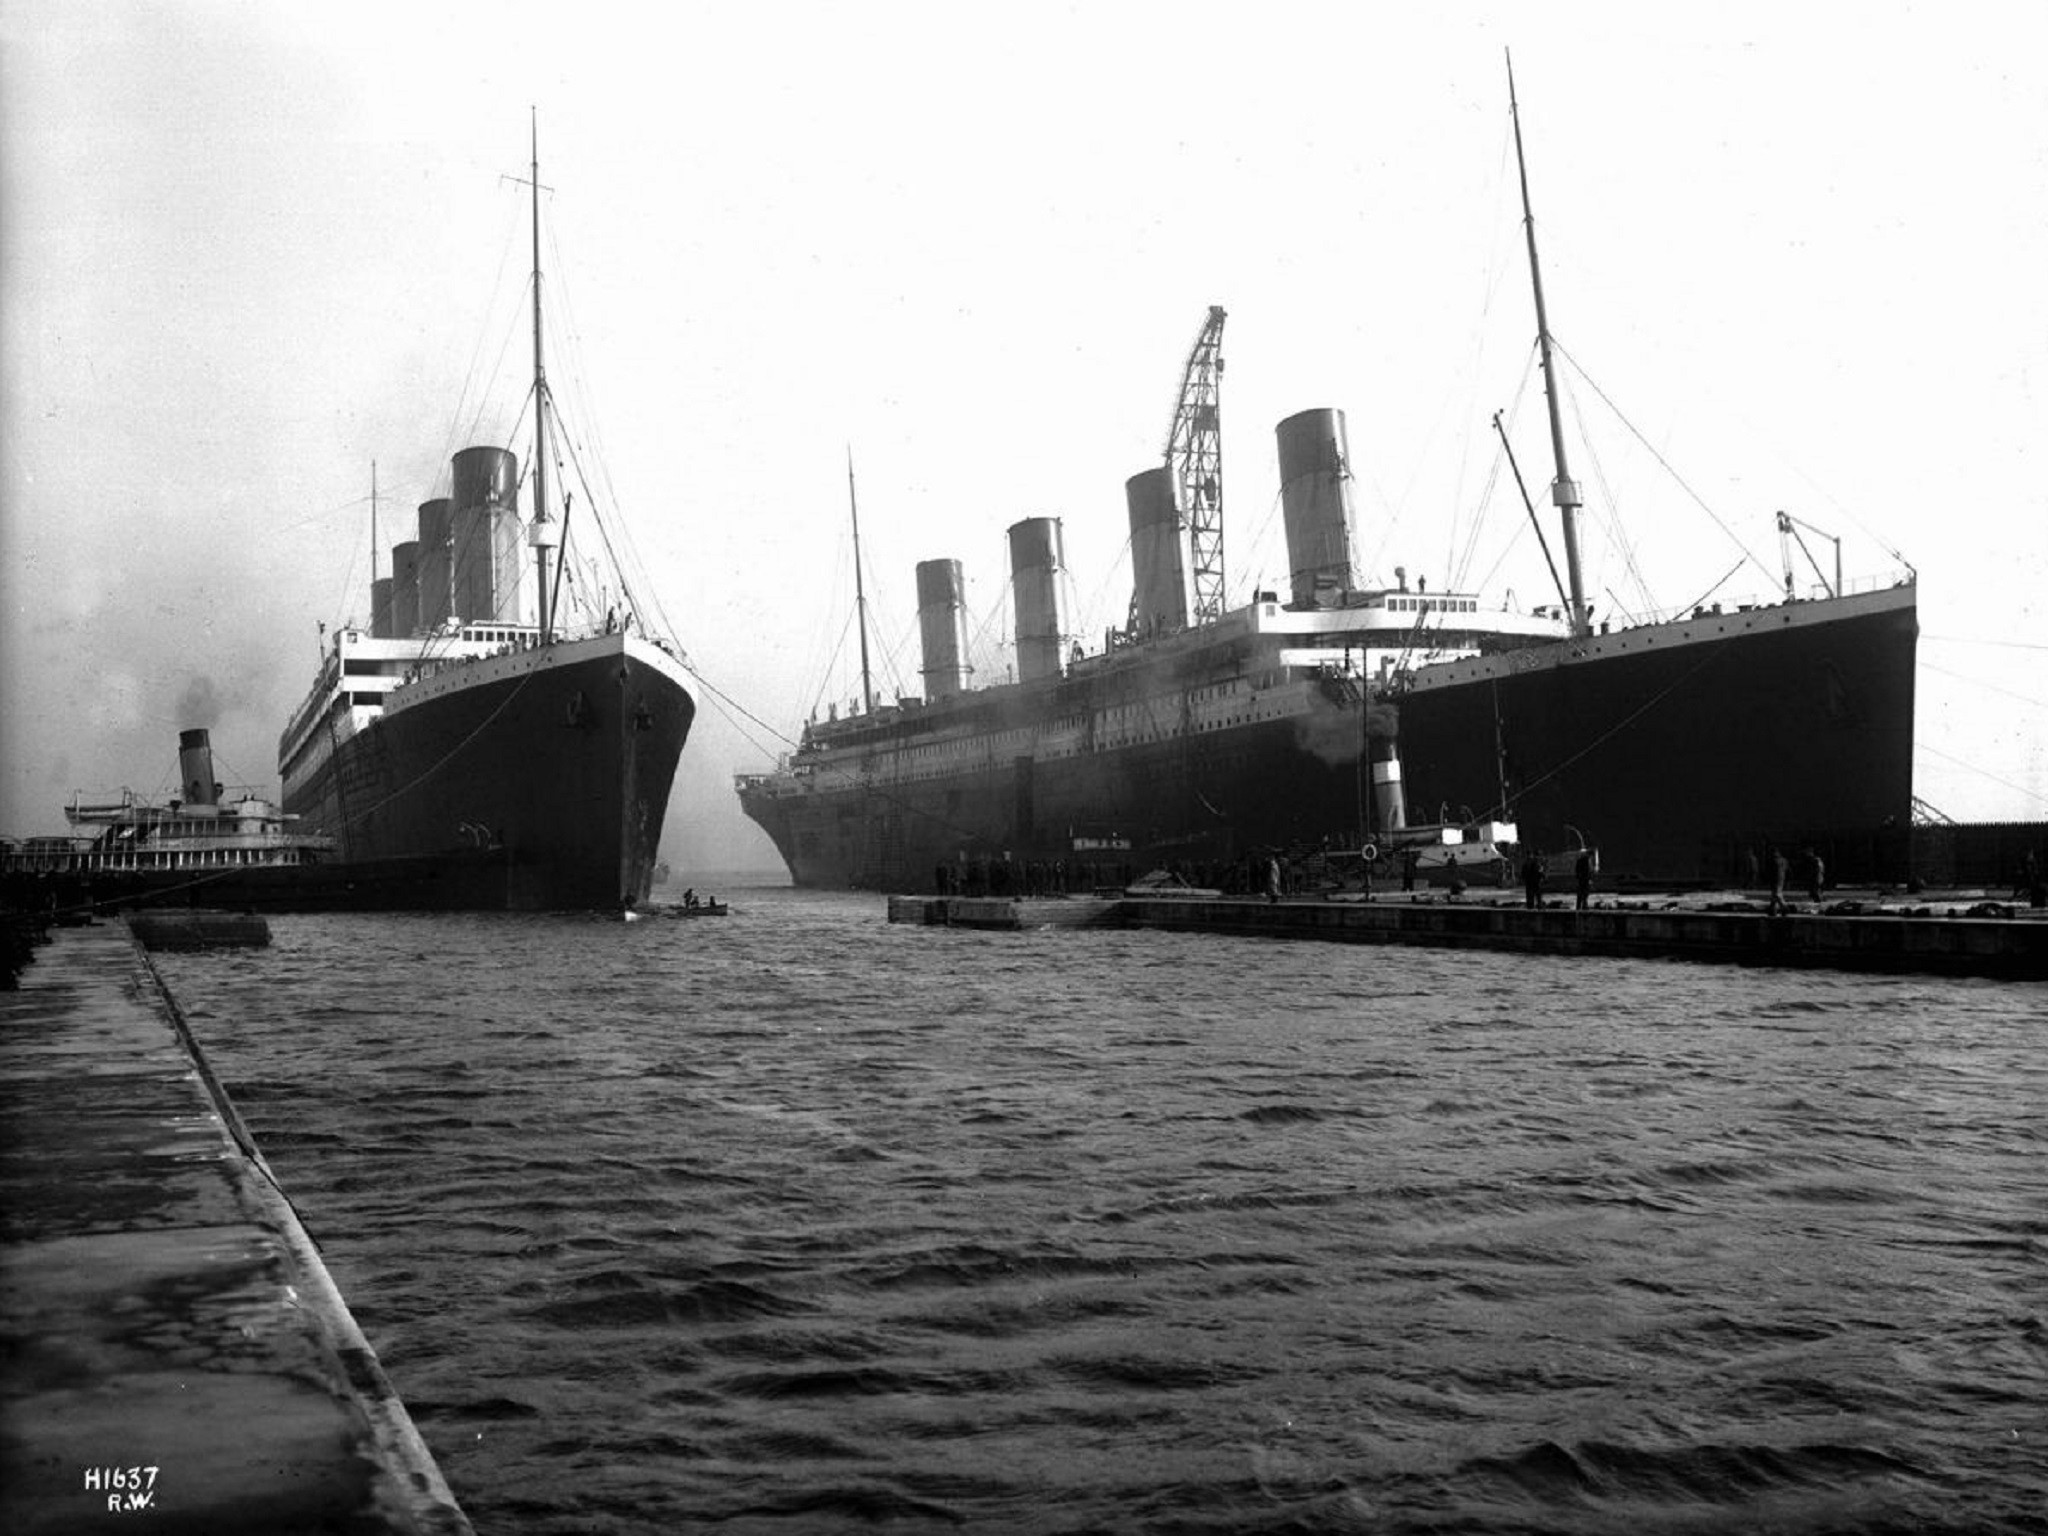 2048x1536 'Titanic 2' shipreck could be divers' theme park | The Independent